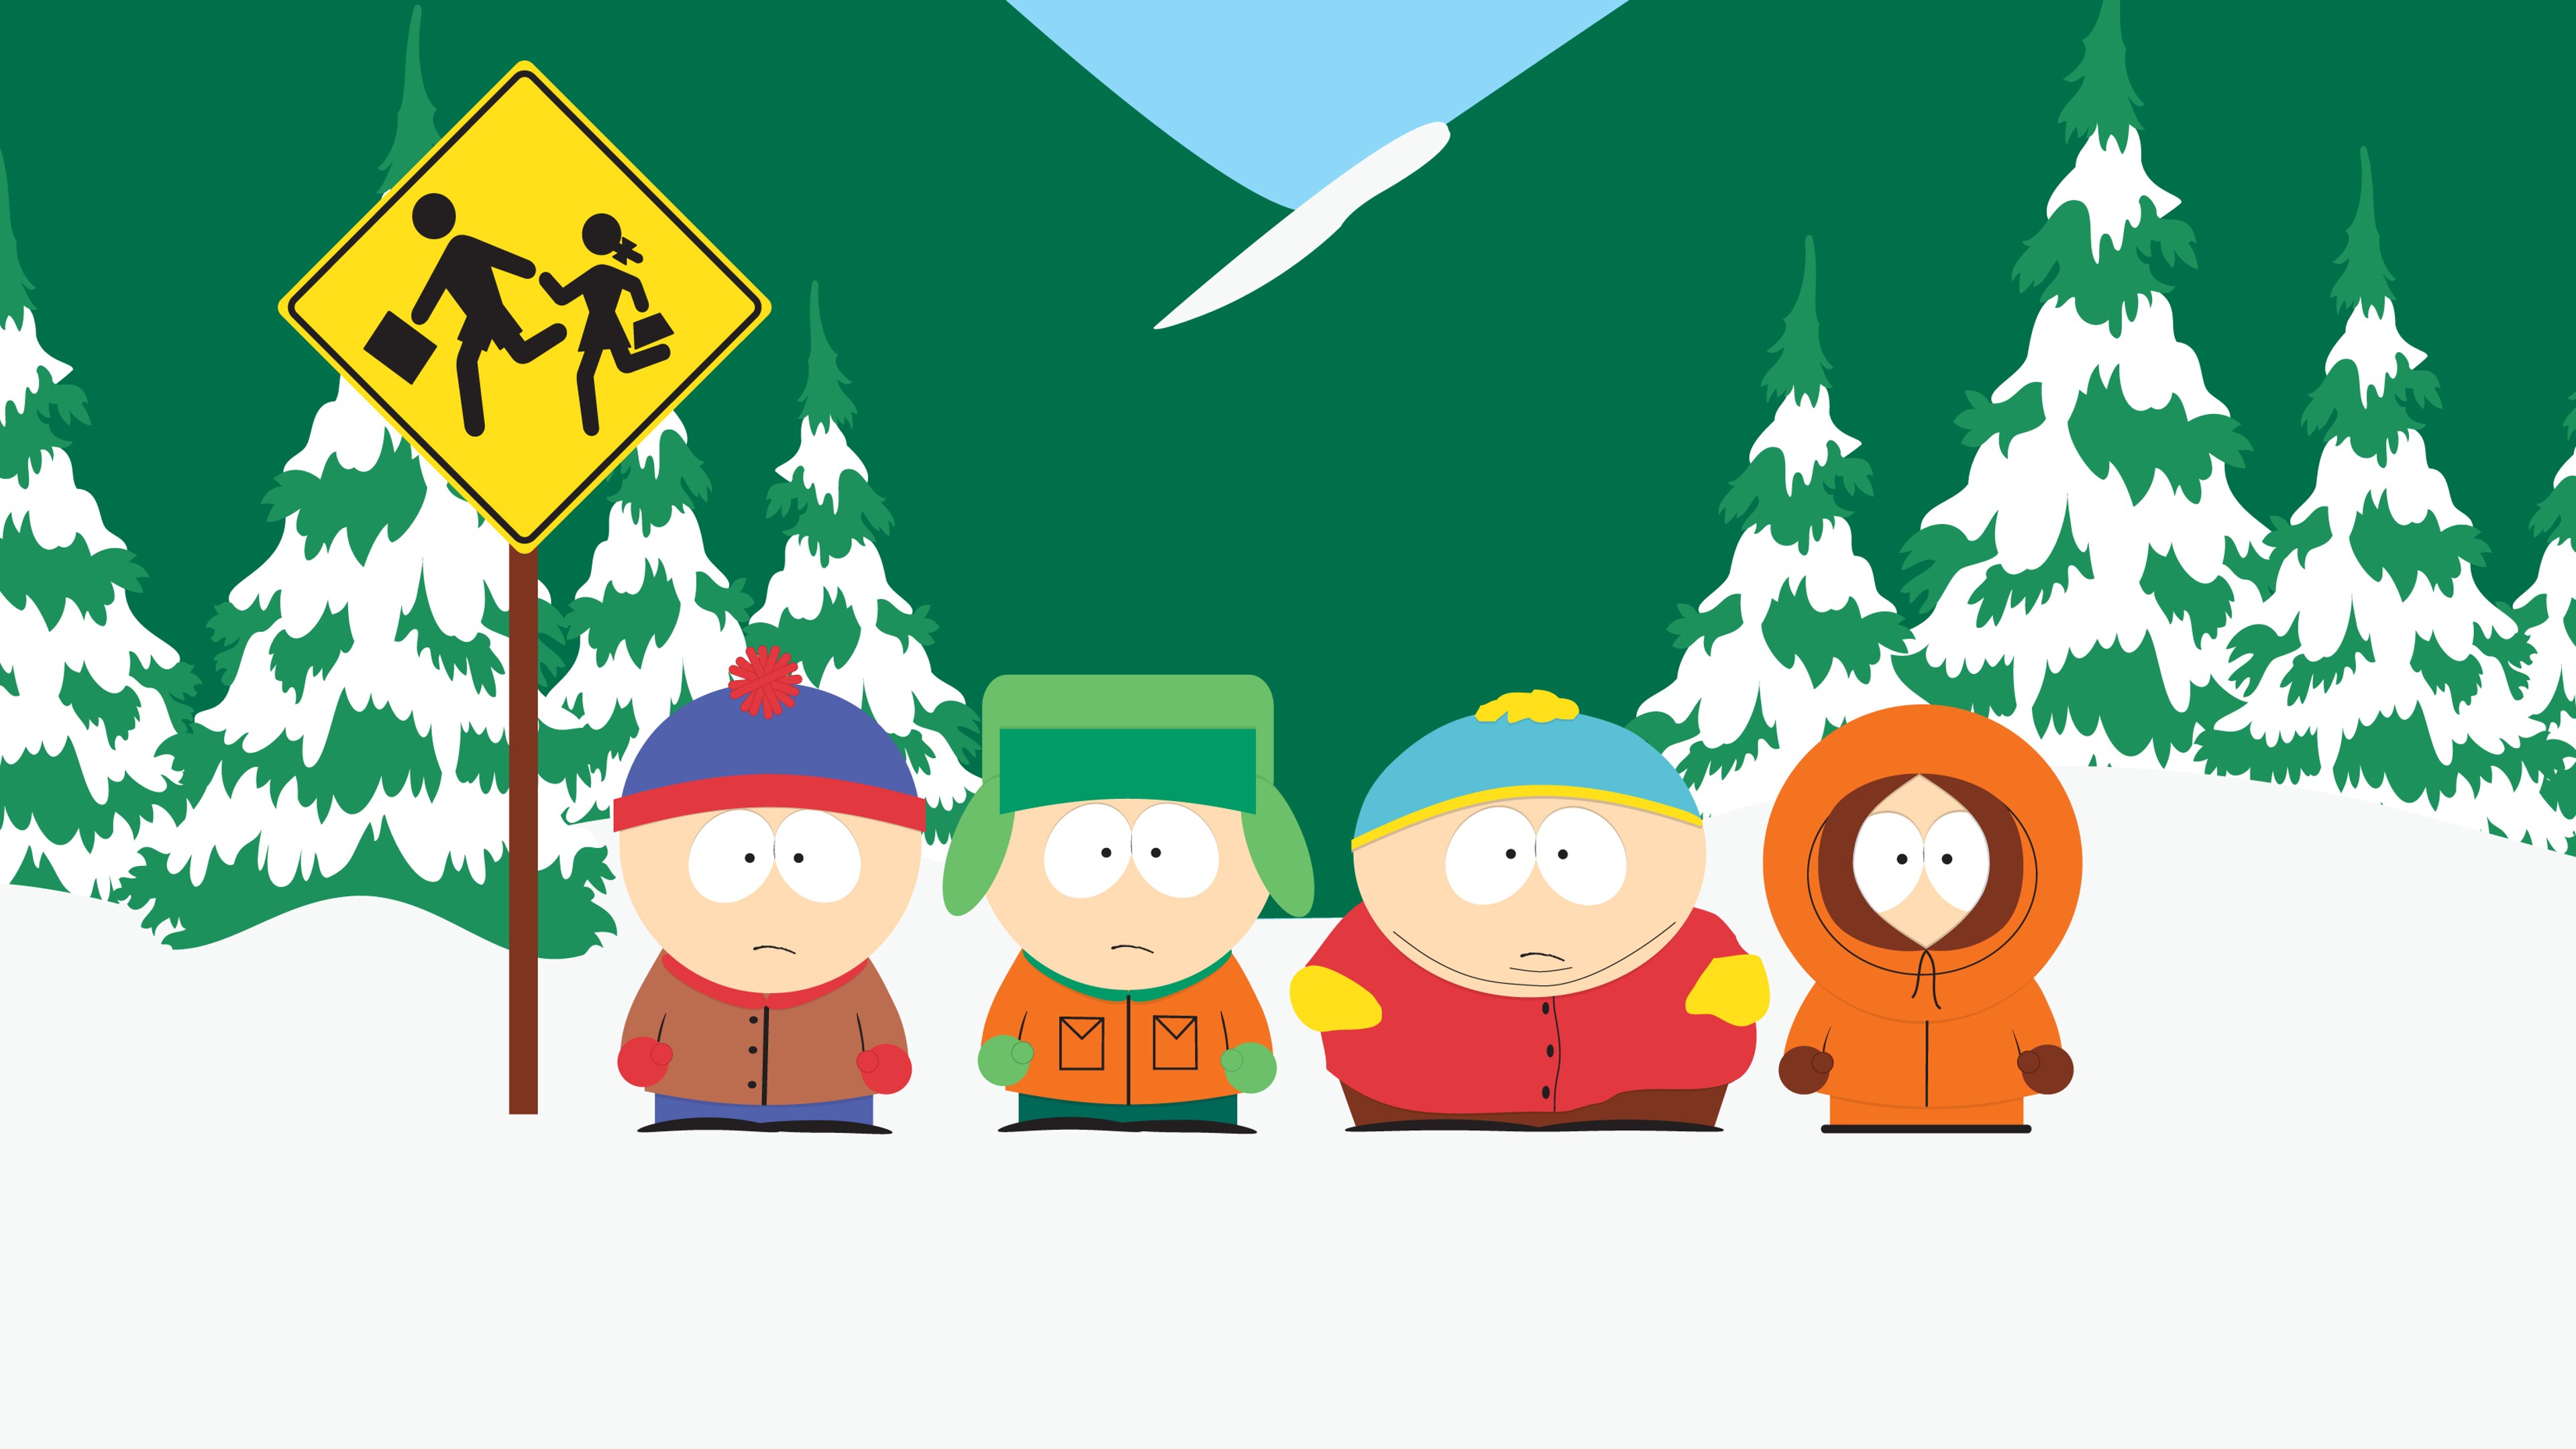 HD Wallpaper for theme: Kenny McCormick HD wallpaper, background